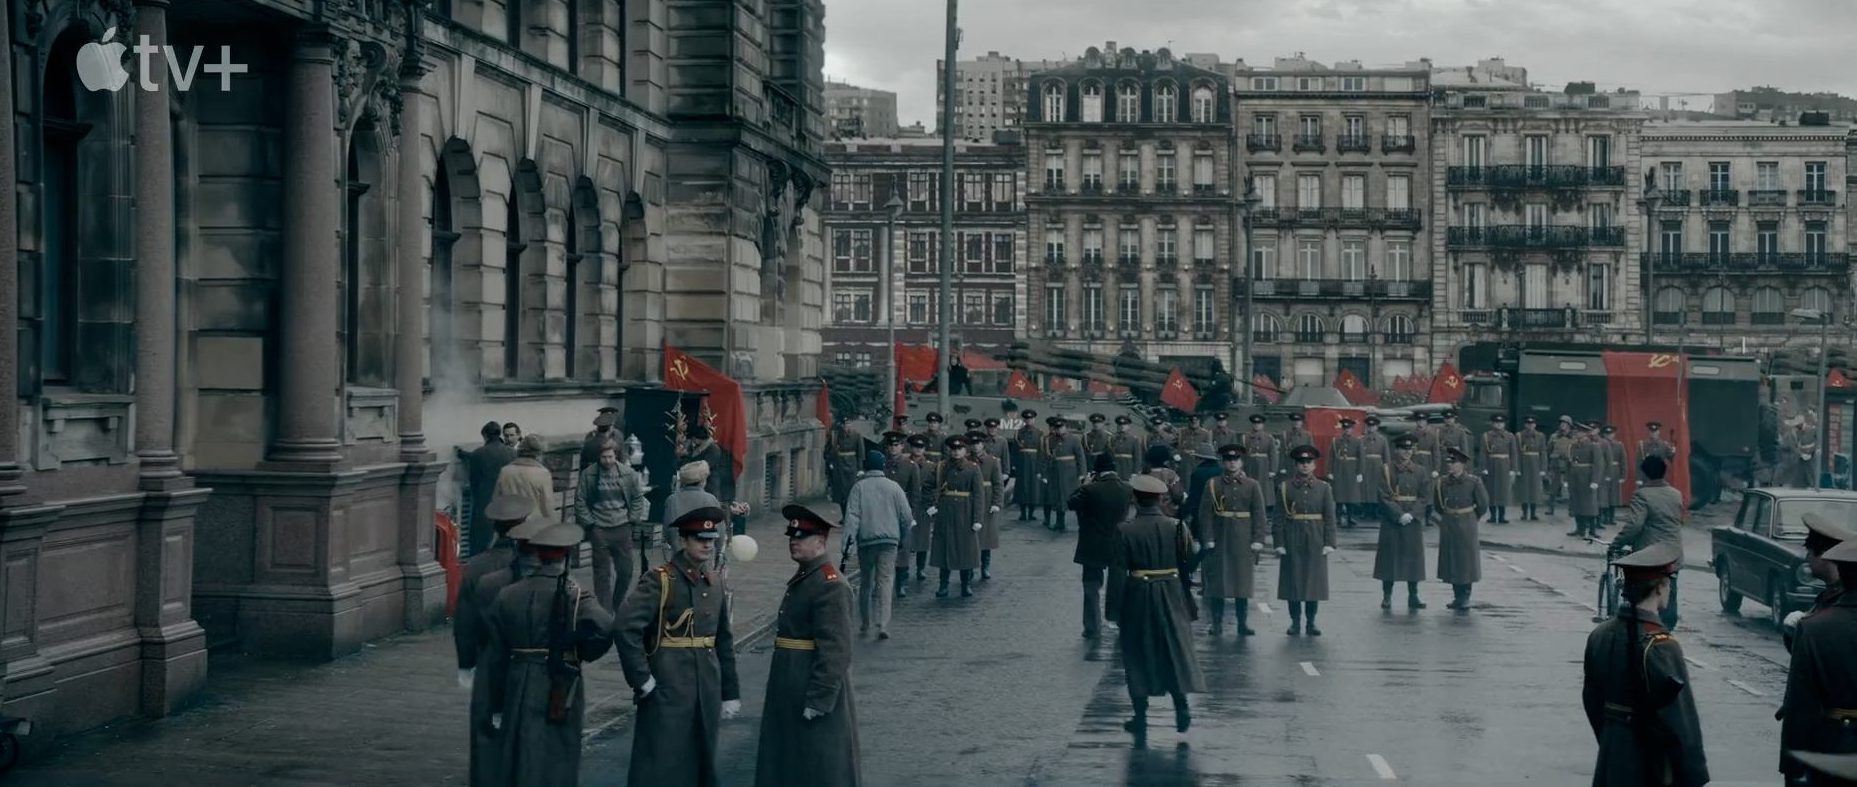 The film was shot in Glasgow and Aberdeen, with the latter standing in for Soviet Russia. (Image: Apple TV+)